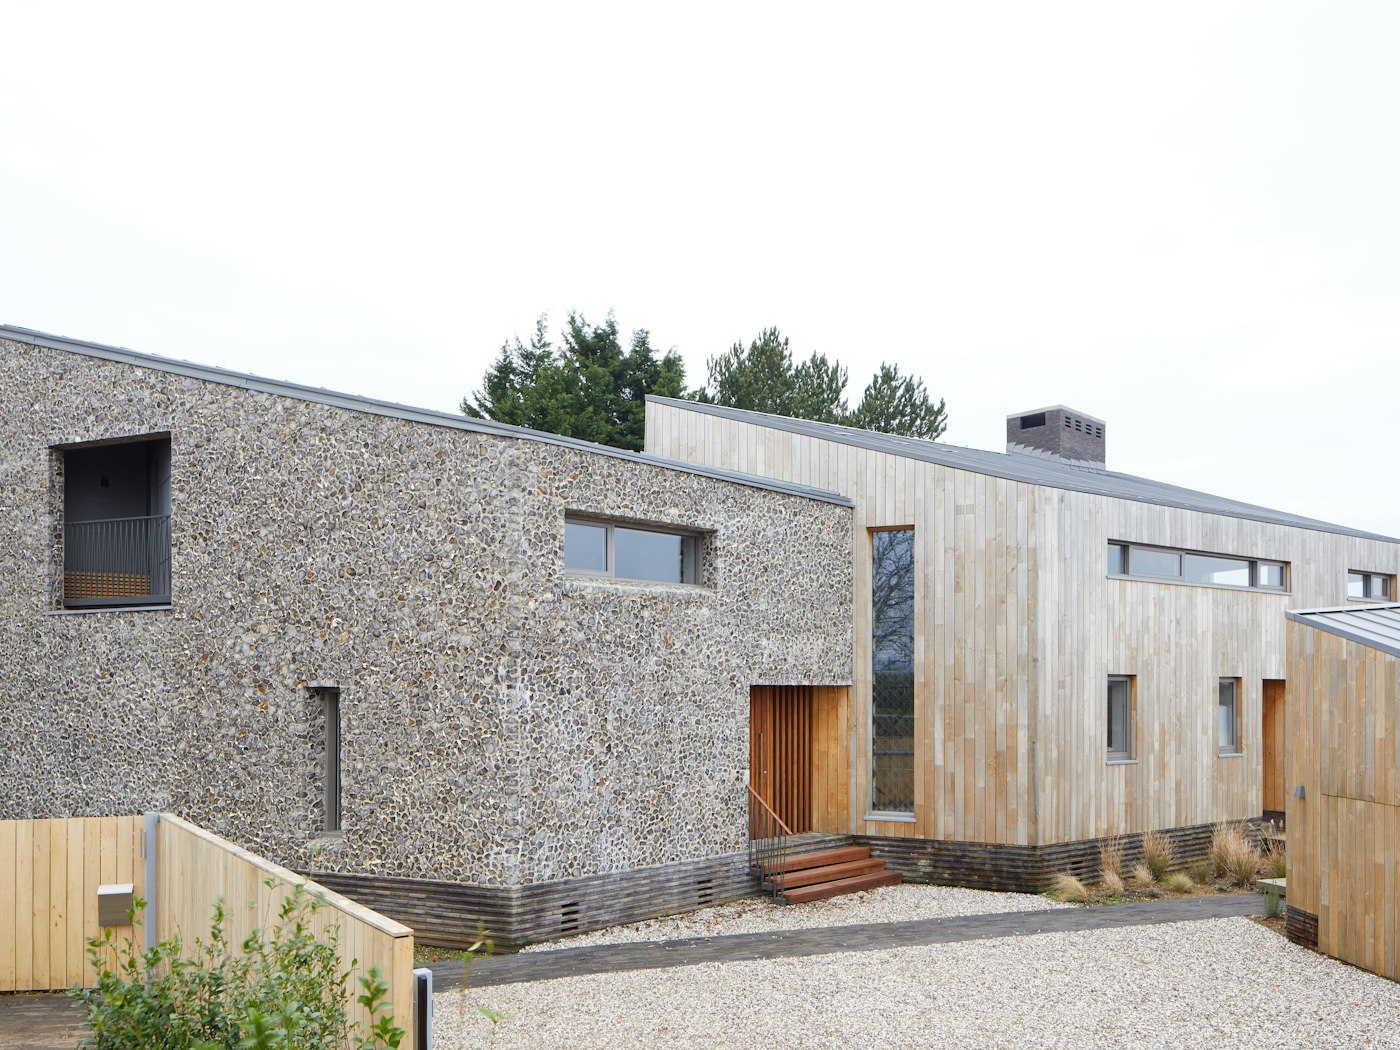 This house uses traditional Norfolk materials 